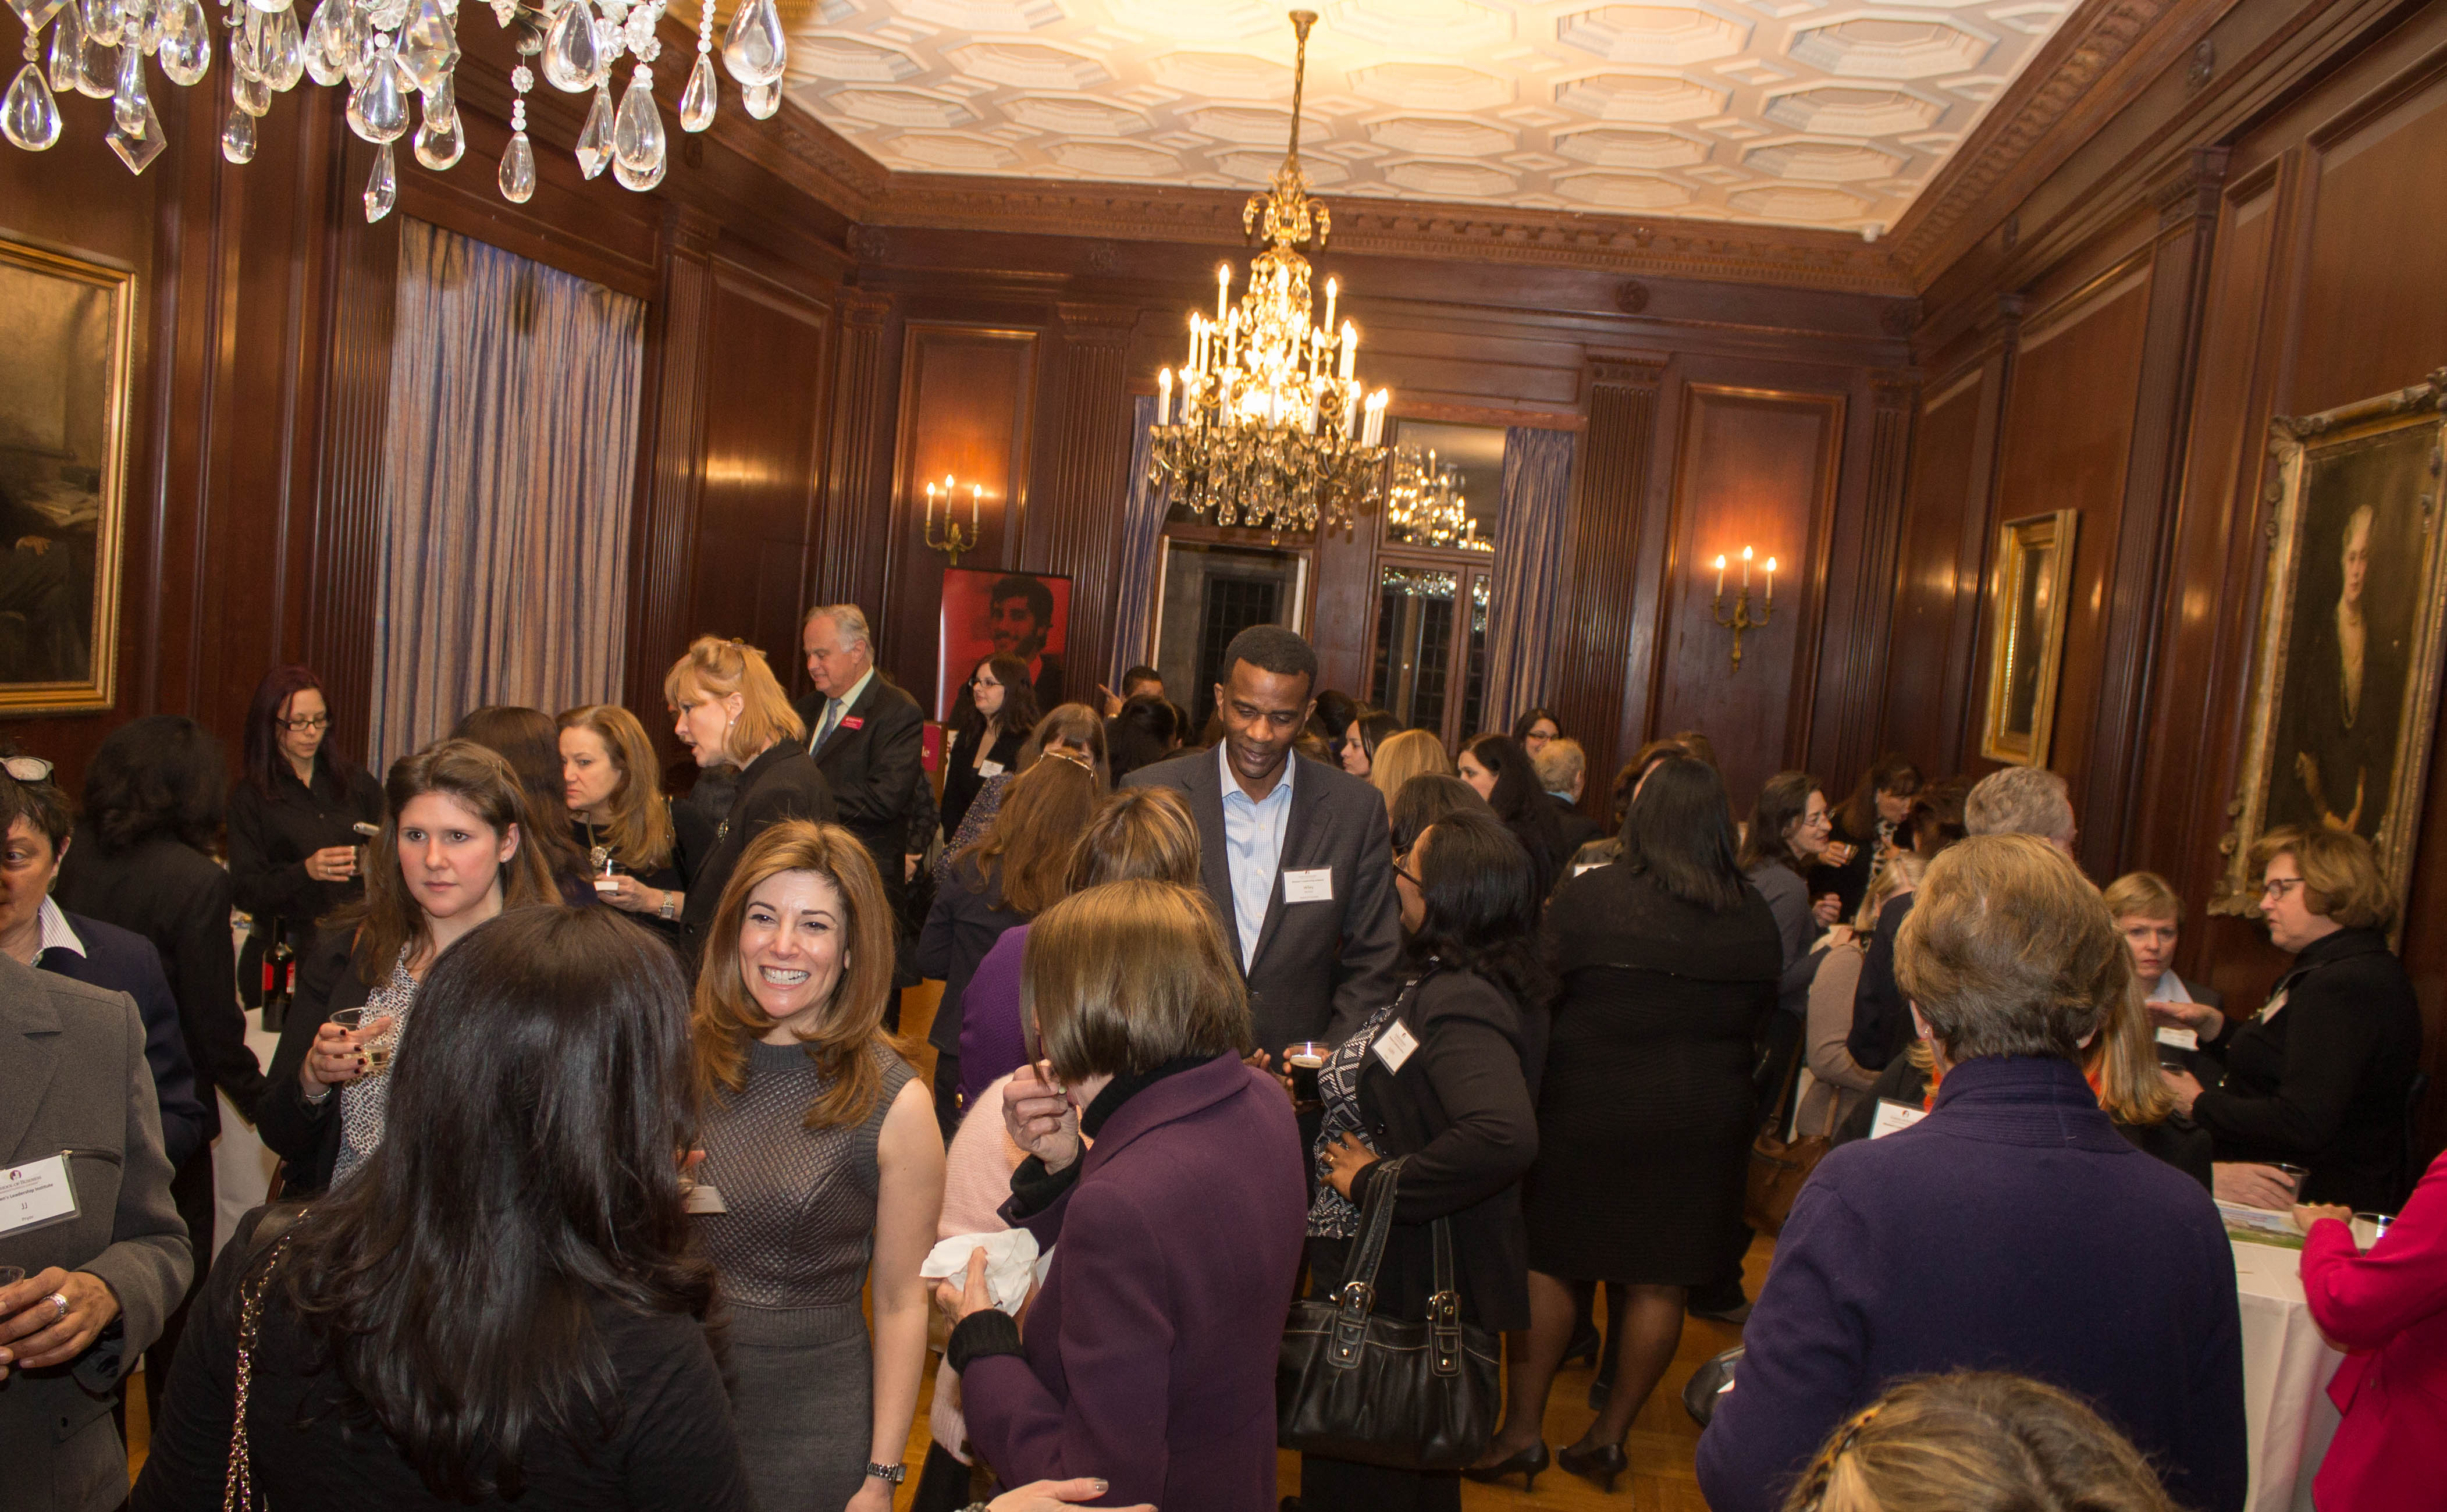 More than 200 powerful female business leaders, community members, and local dignitaries participate in “speed networking” during the launch event for the Women’s Leadership Institute.